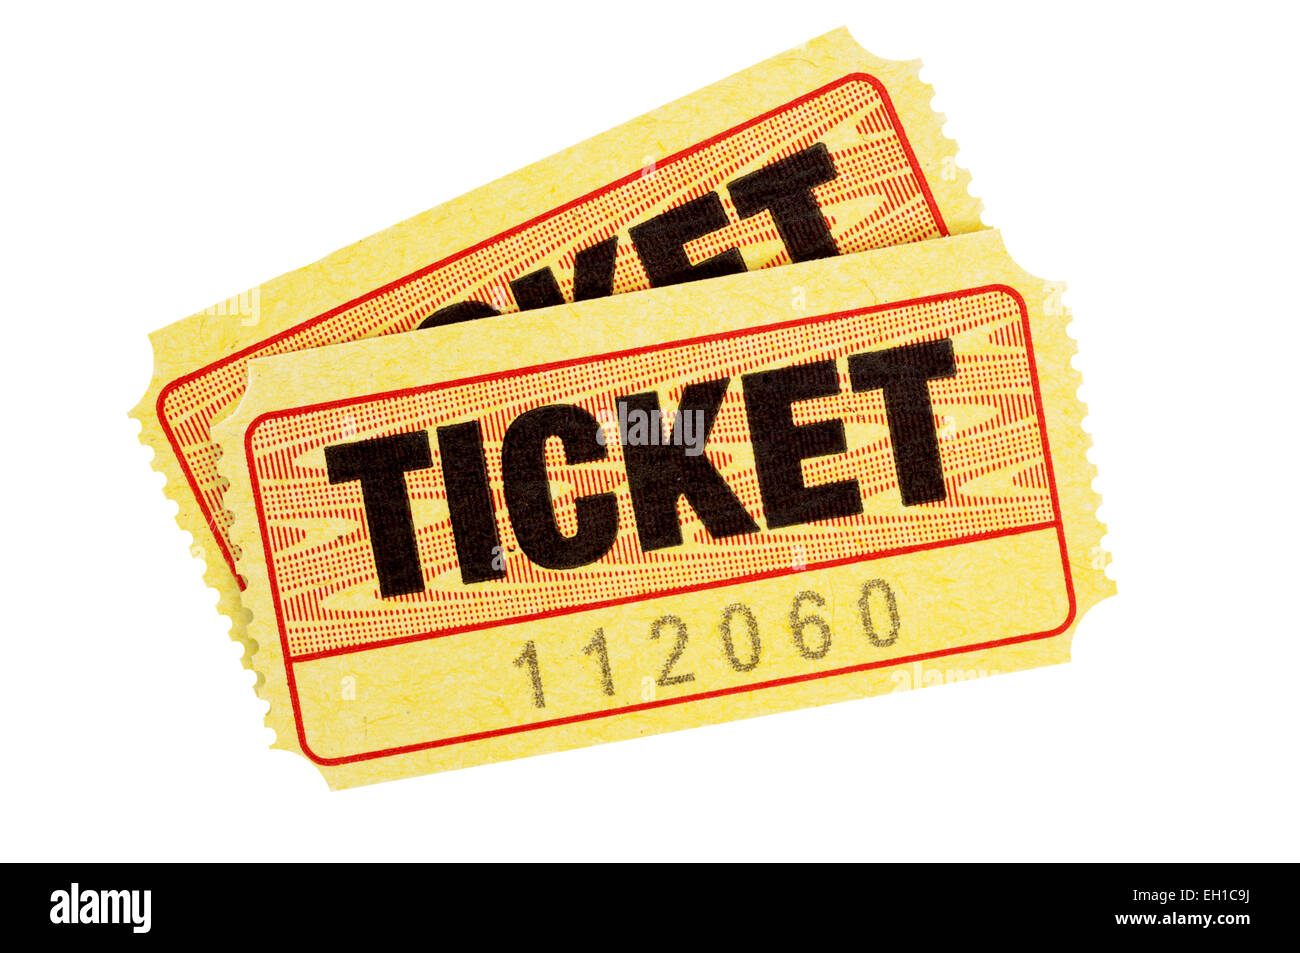 Pair of yellow admission tickets isolated on a white background. Stock Photo